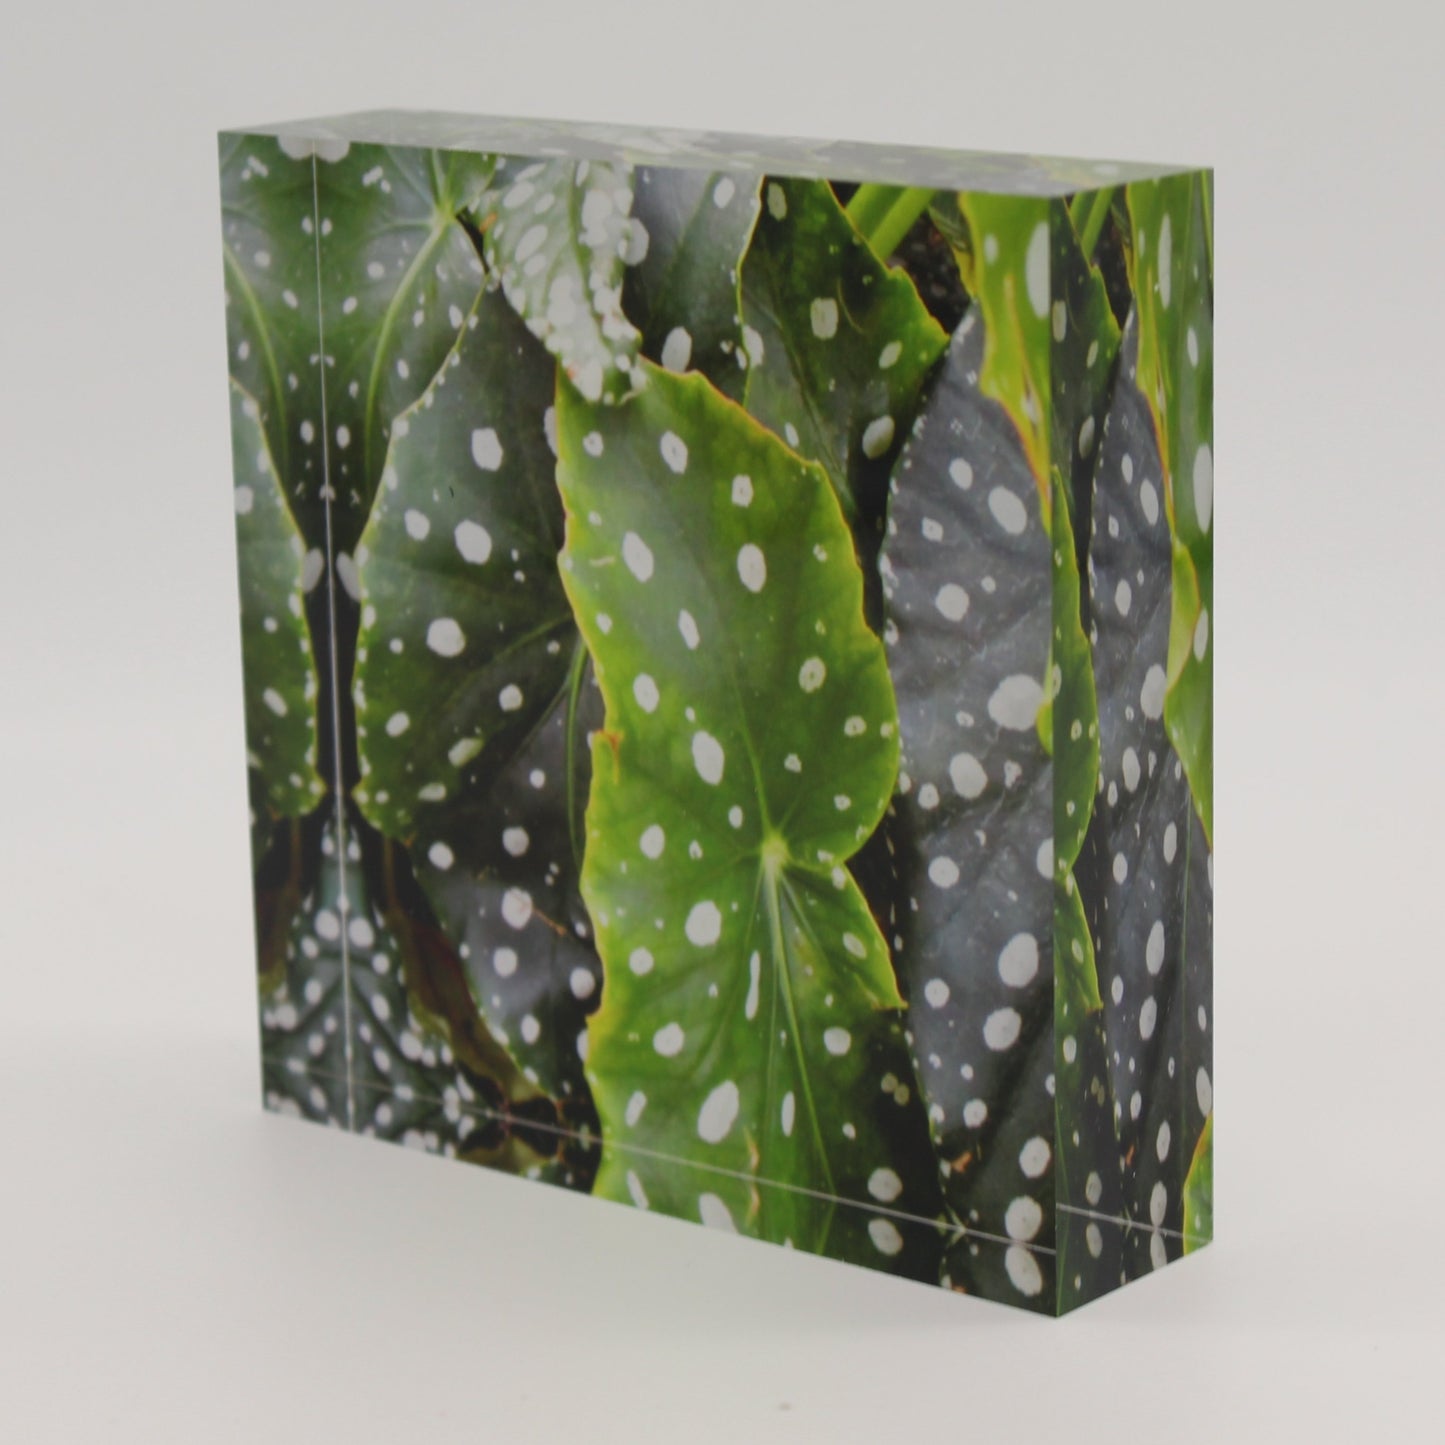 Tilted view of Acrylic block depicting water droplets on green leaves